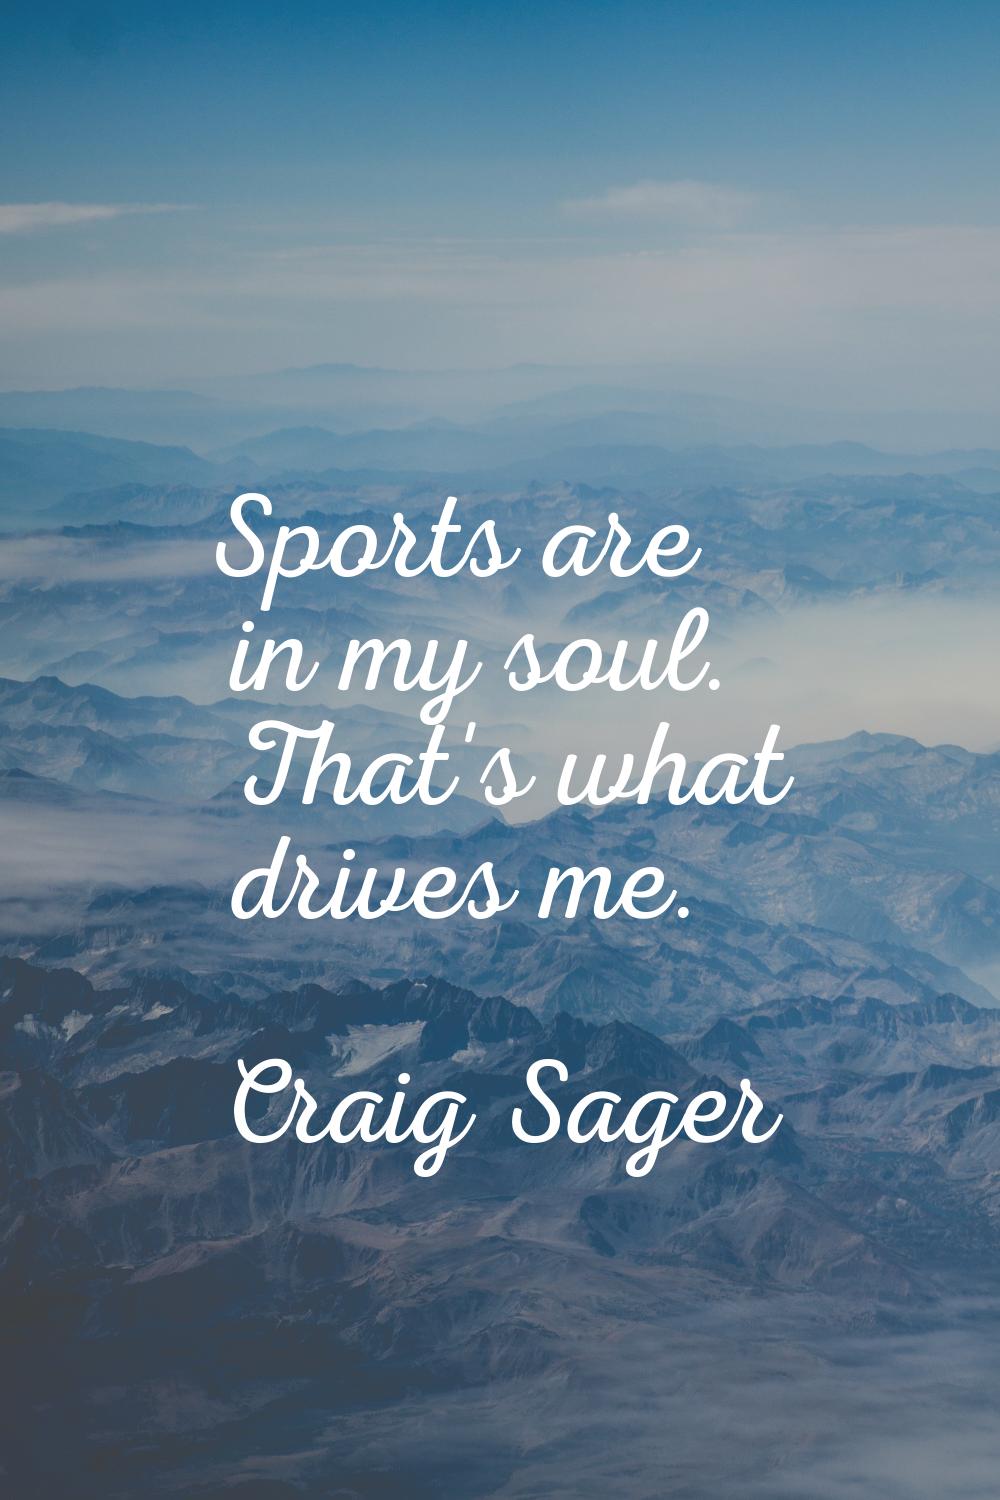 Sports are in my soul. That's what drives me.